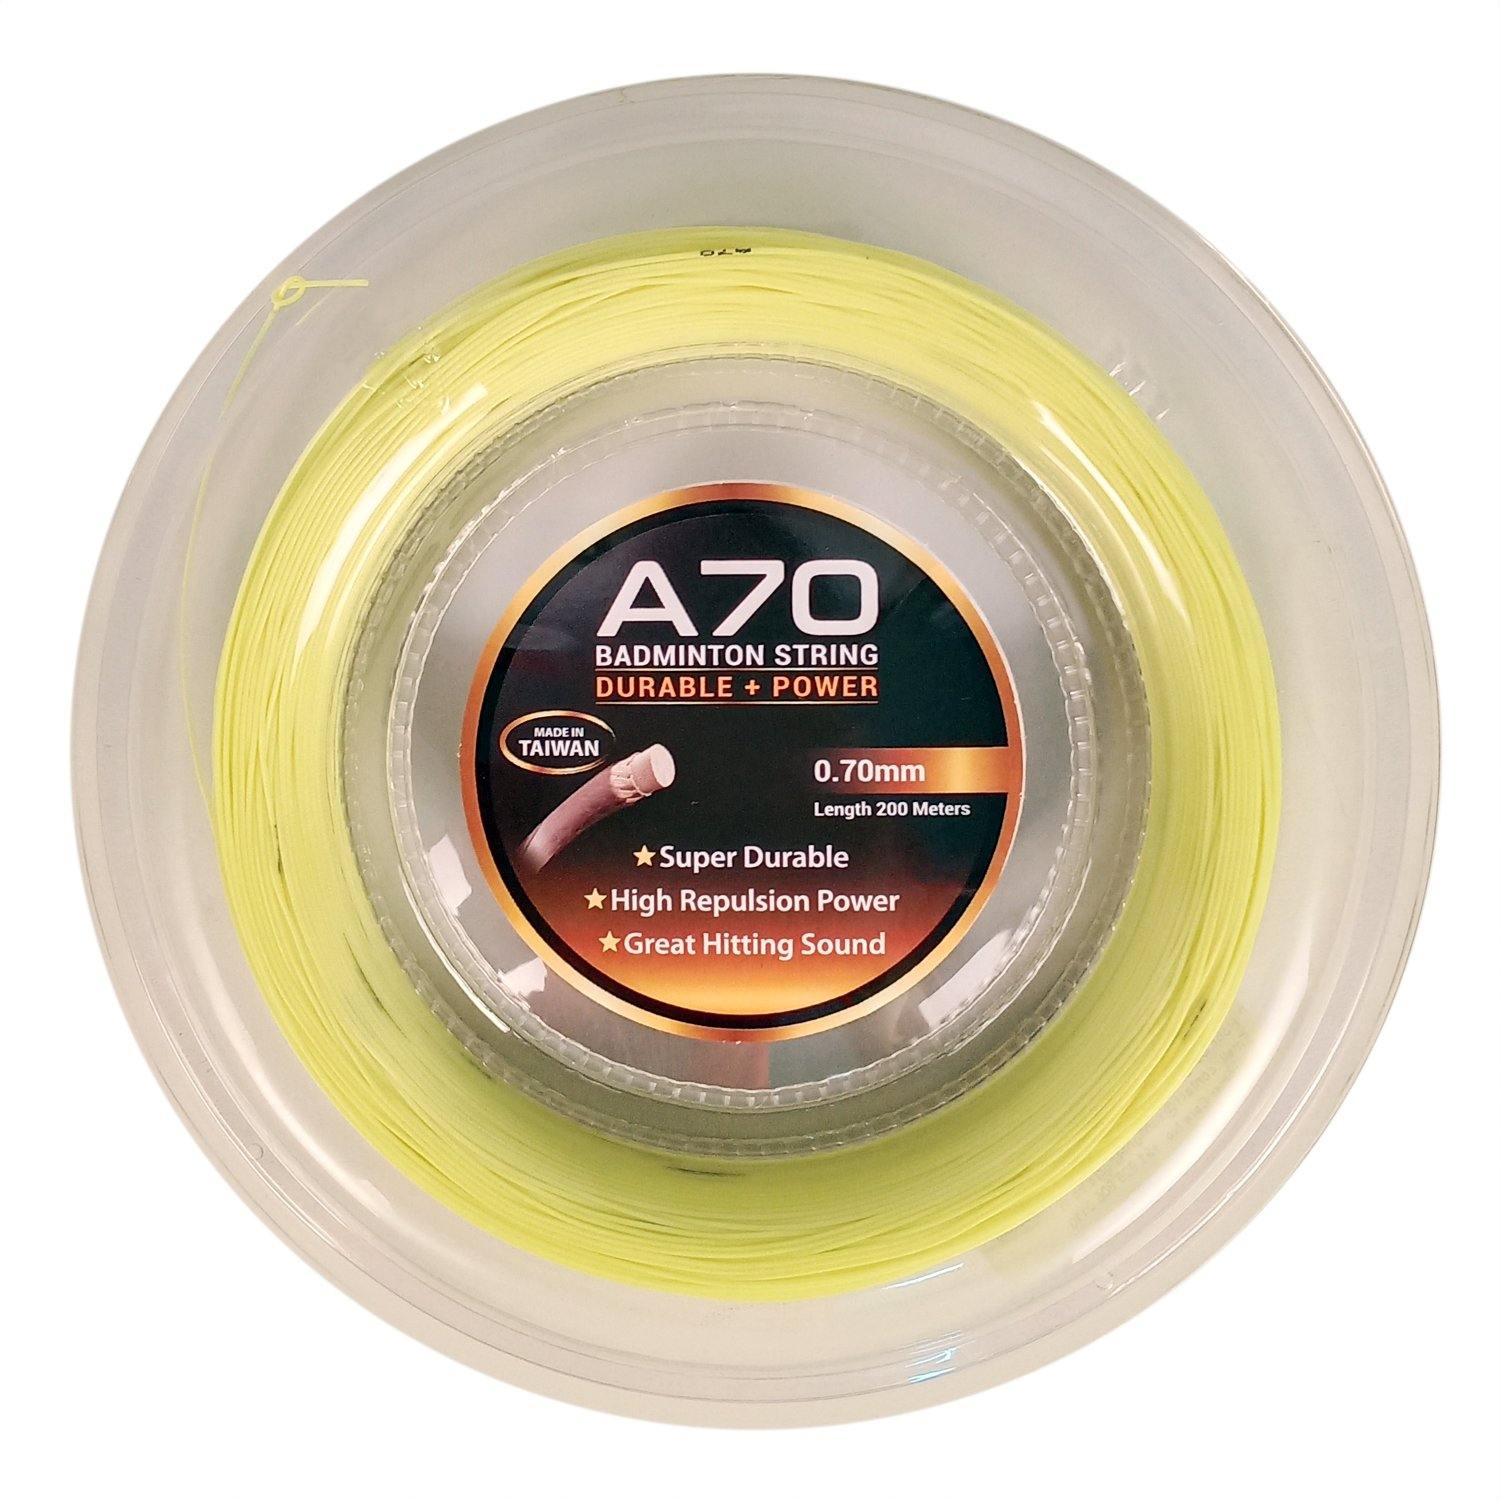 Li-Ning A 70 Badminton 200 Mtrs String Roll, Lime (Made in Taiwan) - Best Price online Prokicksports.com